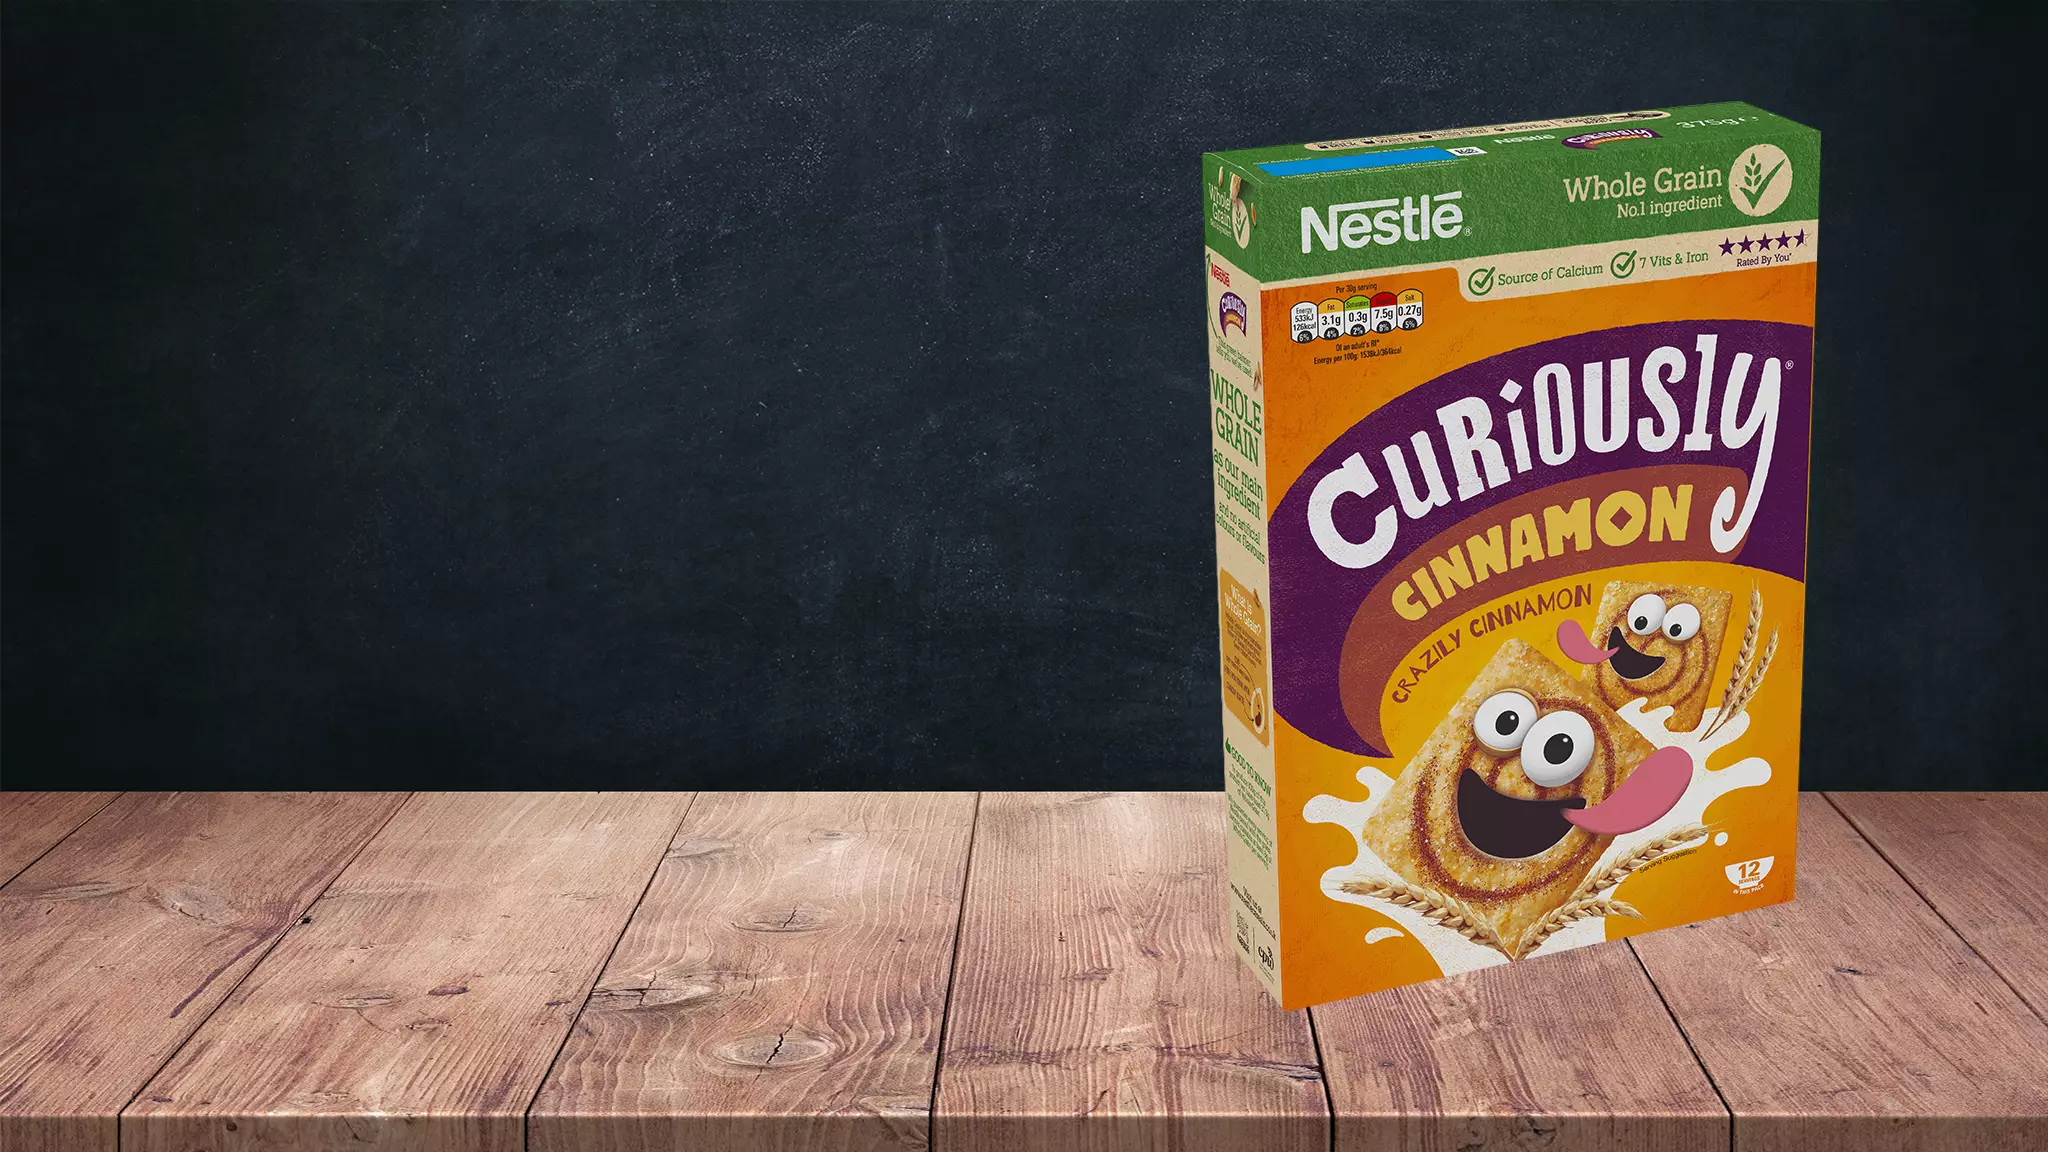 The Churros cereal is the latest in Nestlé's Curiously Cinnamon range (